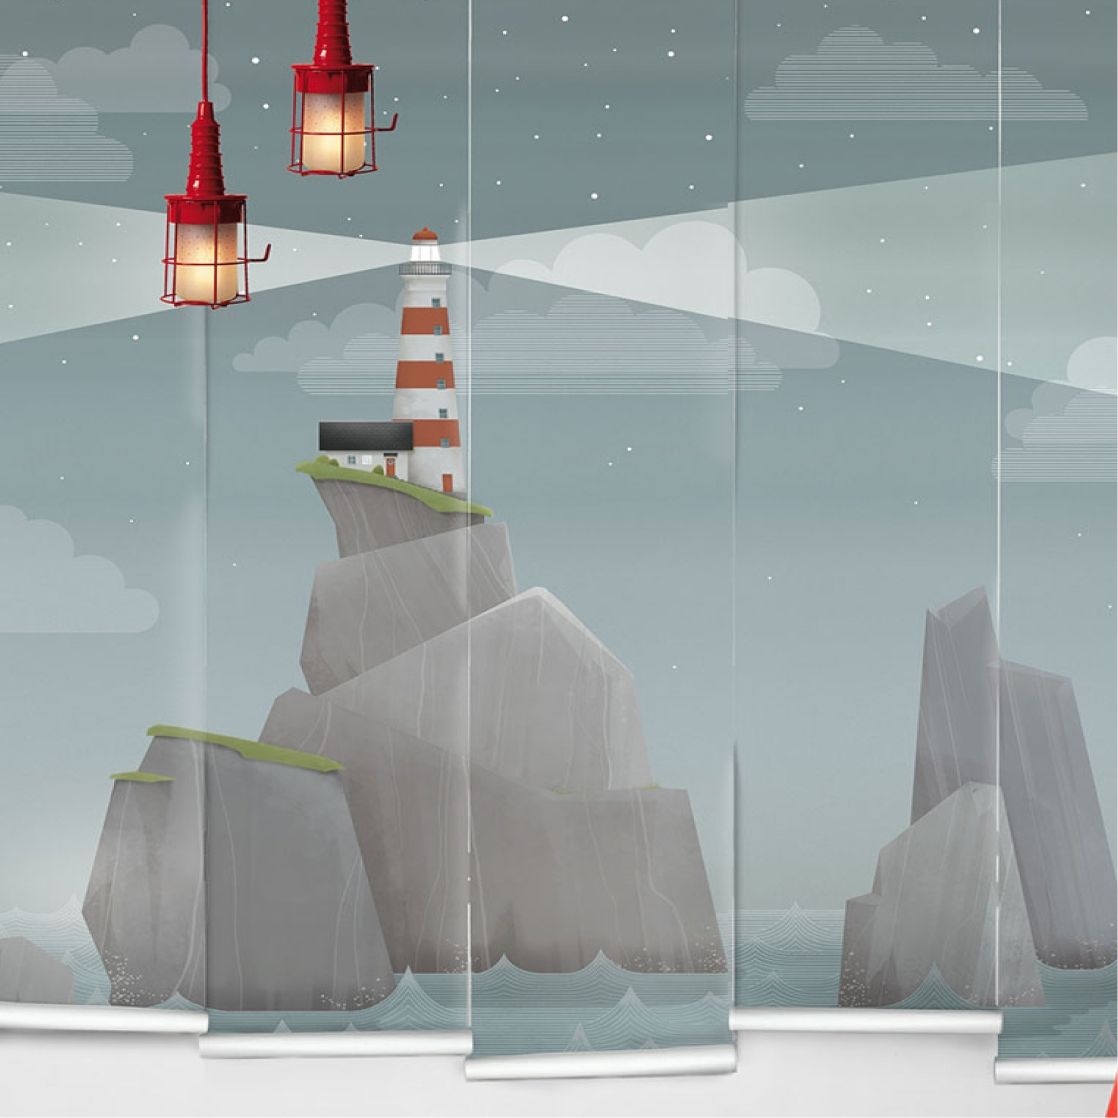 Wallpaper Republic • Happiest Places Collection • Lighthouse at Night